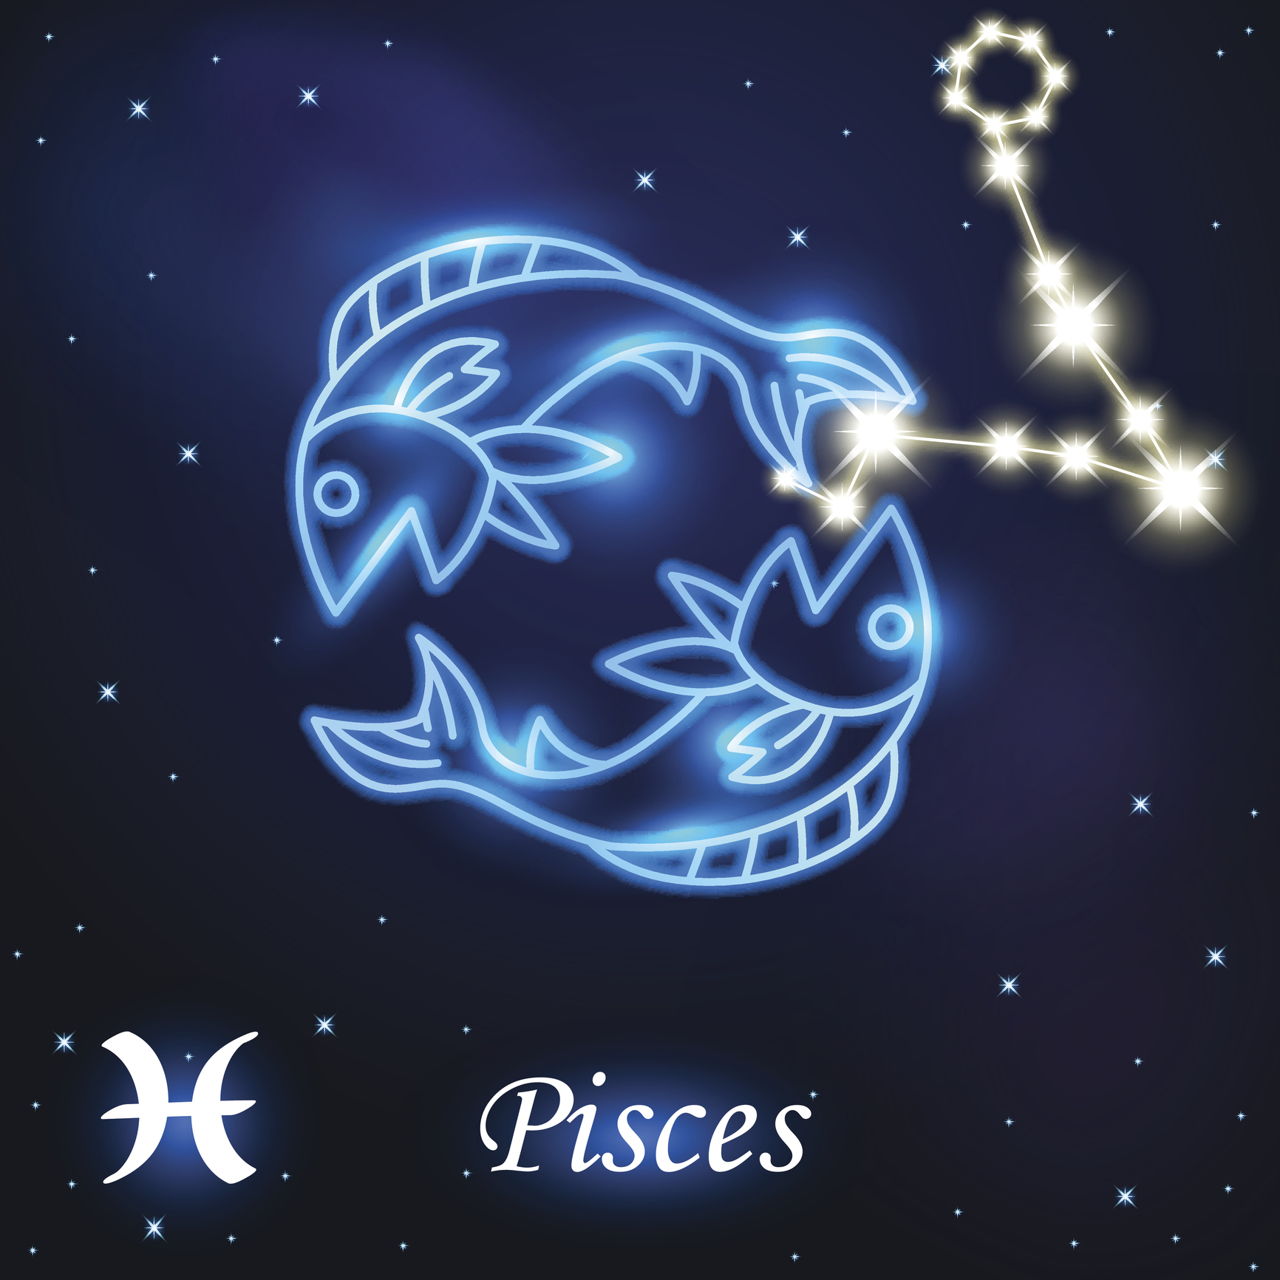 7 Reasons Why Pisces Is The Most Difficult Zodiac Sign To Understand